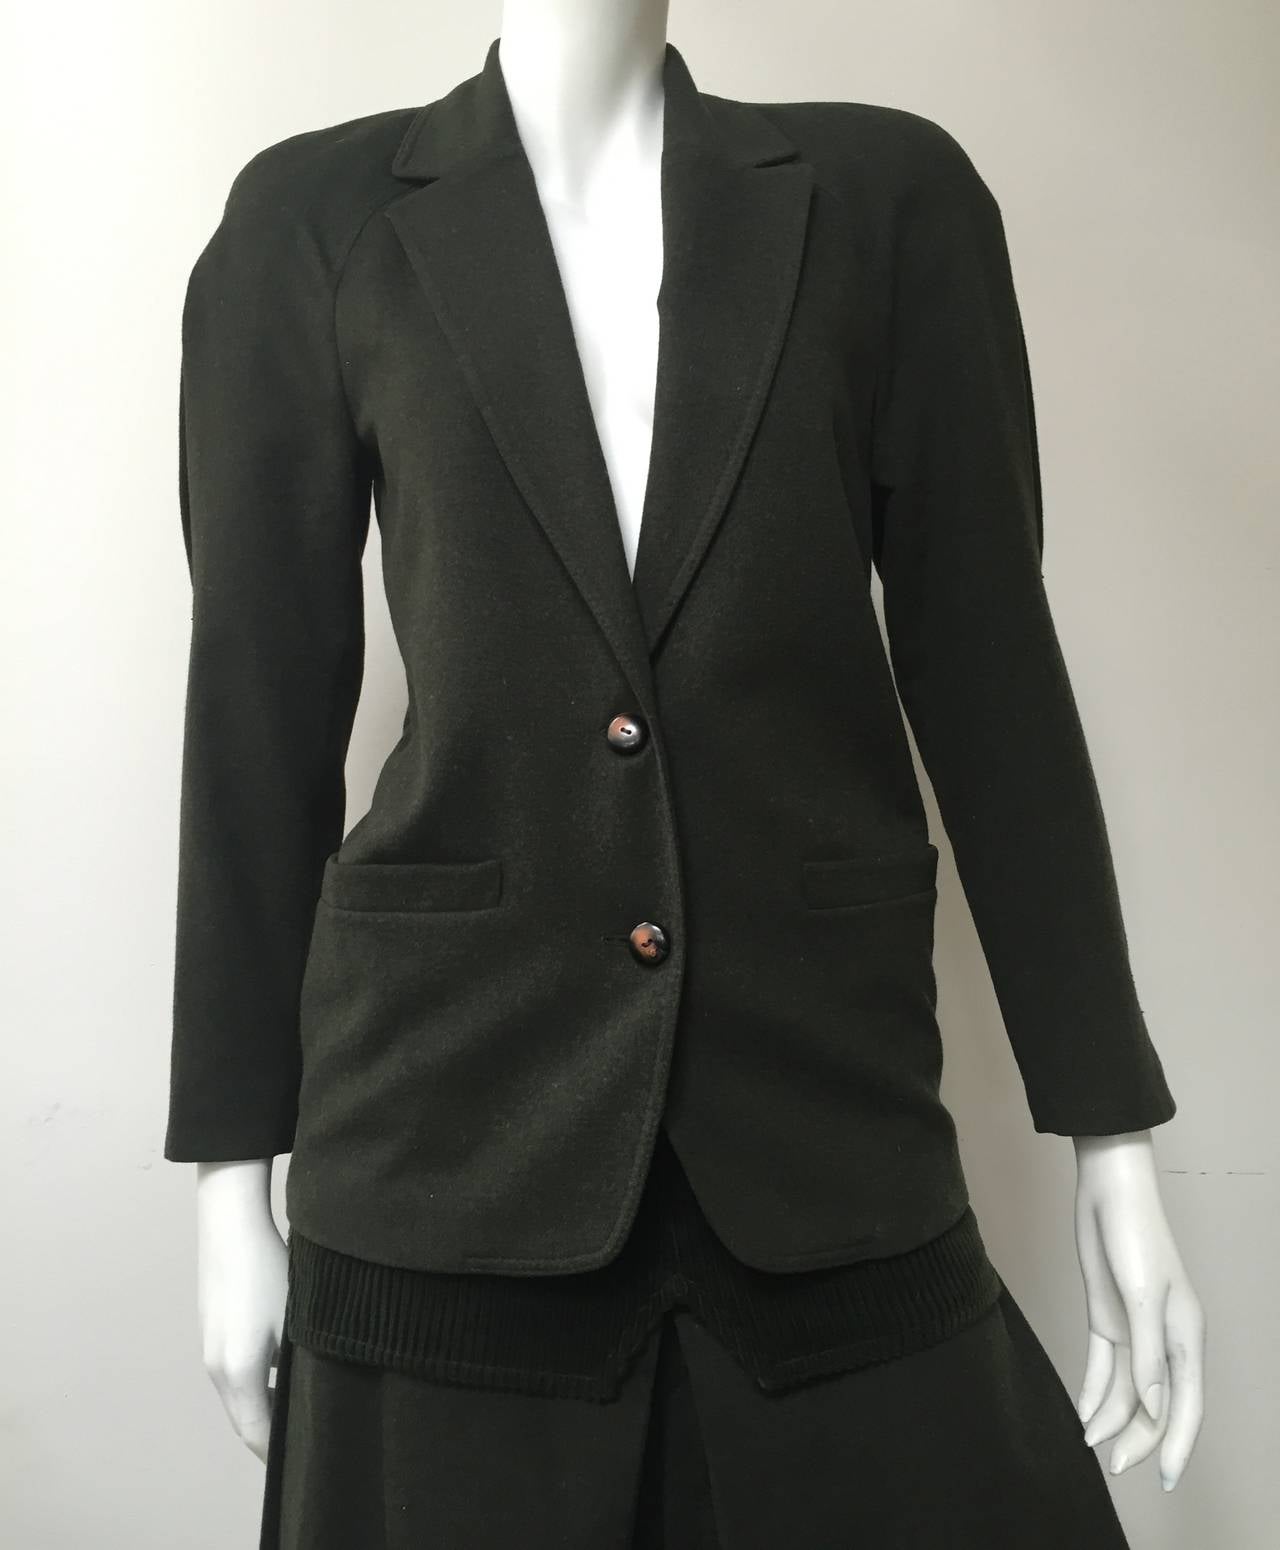 Gianni Versace 80s green wool jacket & gauchos size 38 or 4 USA,  made in Italy.
Inverted pleat on both sleeves and in back of jacket.
Gauchos have pleats on both sides.
Corduroy fabric at waistline of gauchos.
Measurements are:
Jacket: 
38